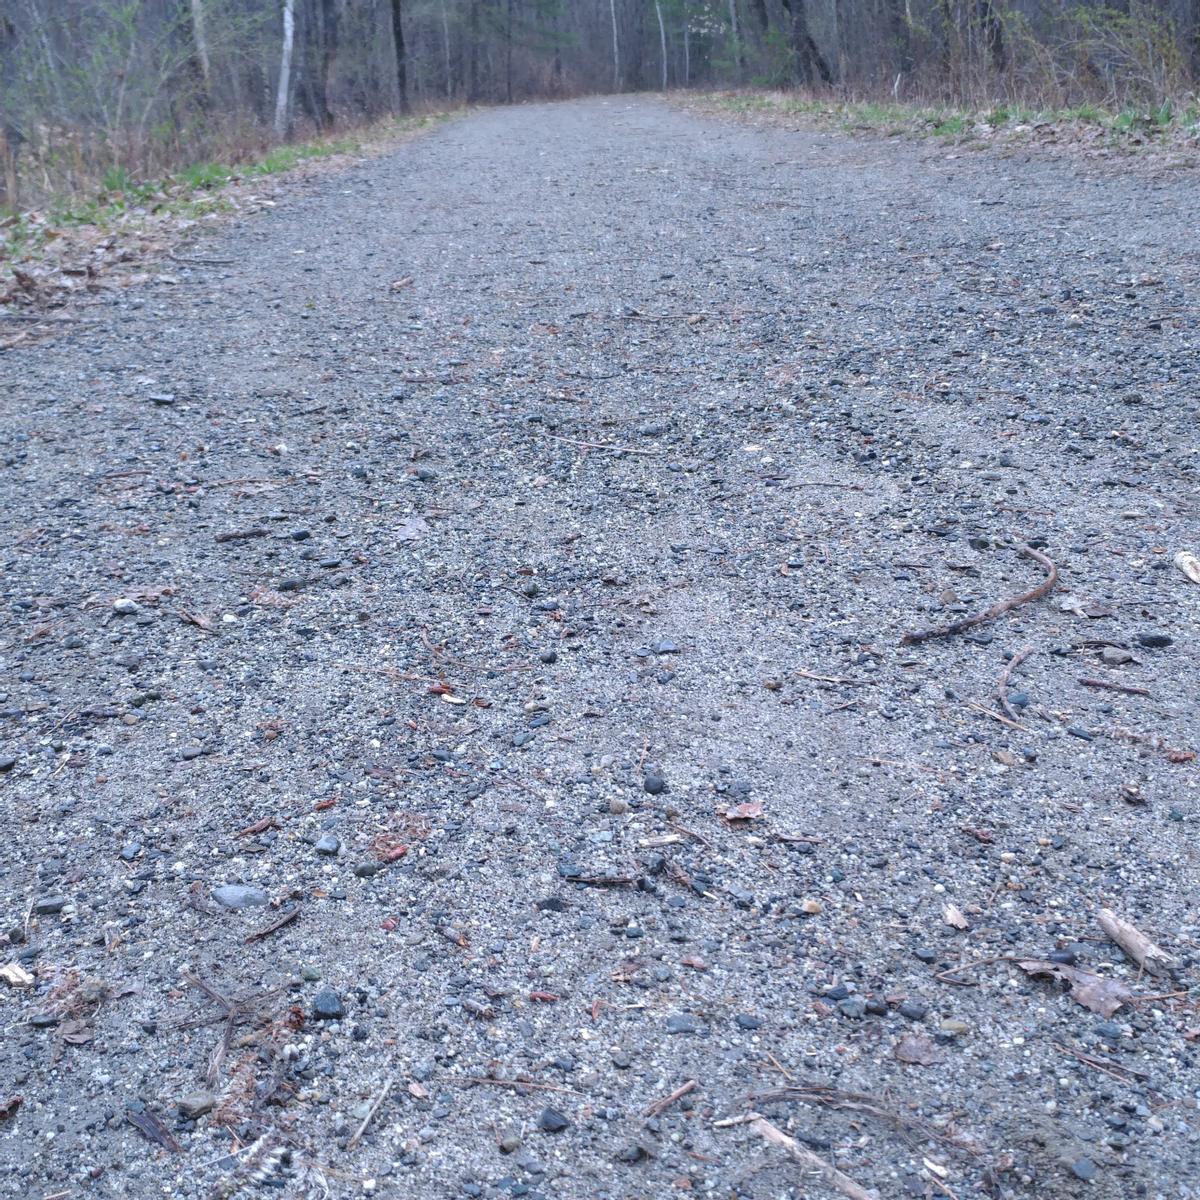 A variety of sizes of rocks makes up the surface of a gravel trail